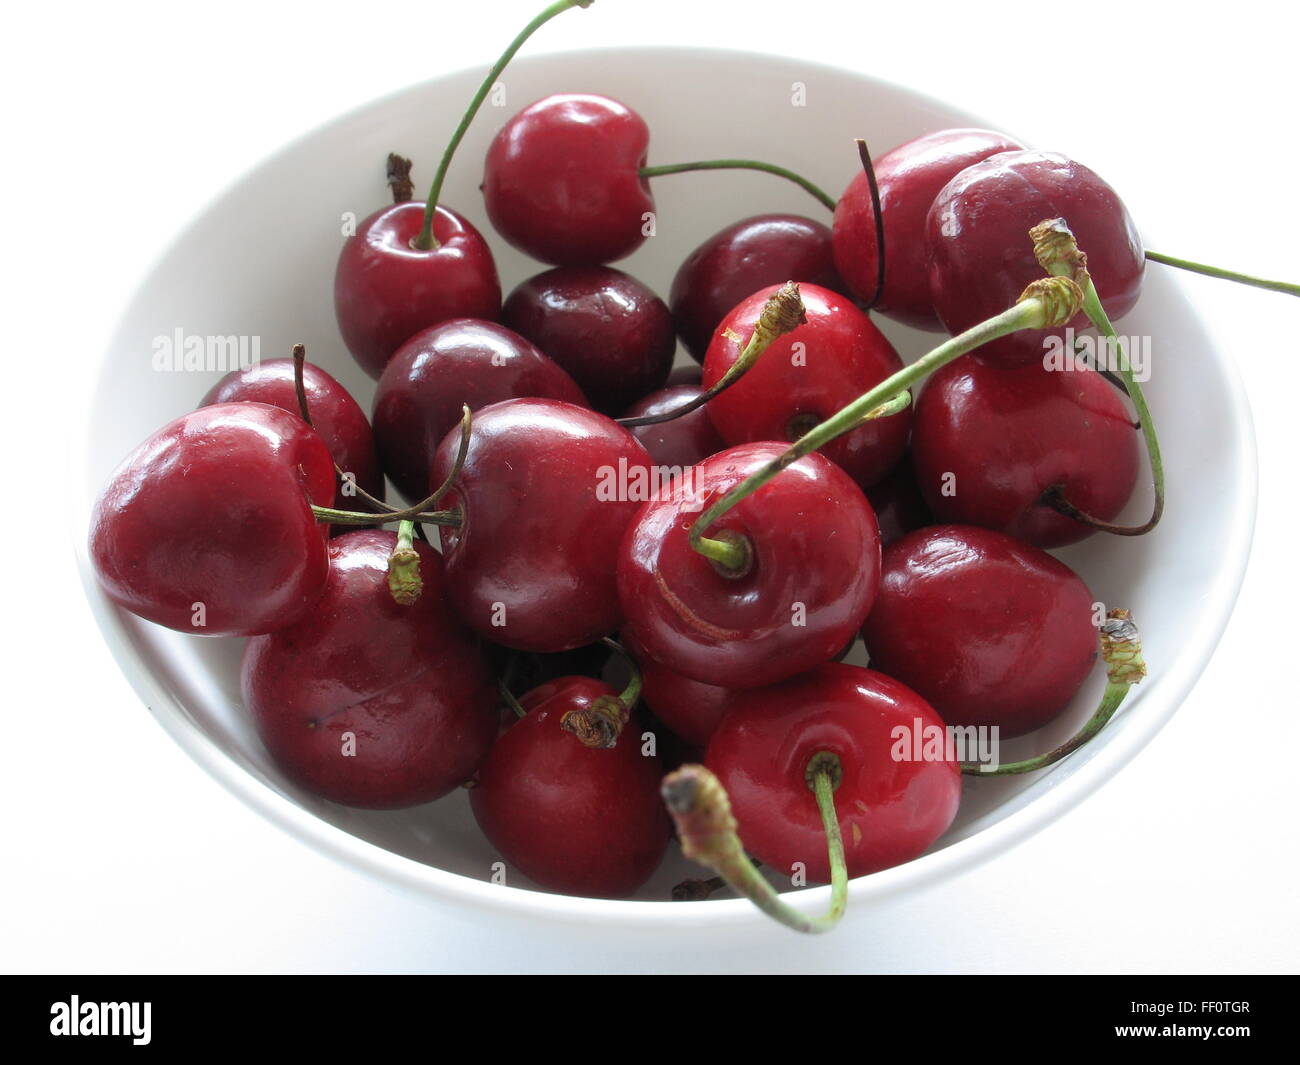 a lot of cherries in a dish Stock Photo